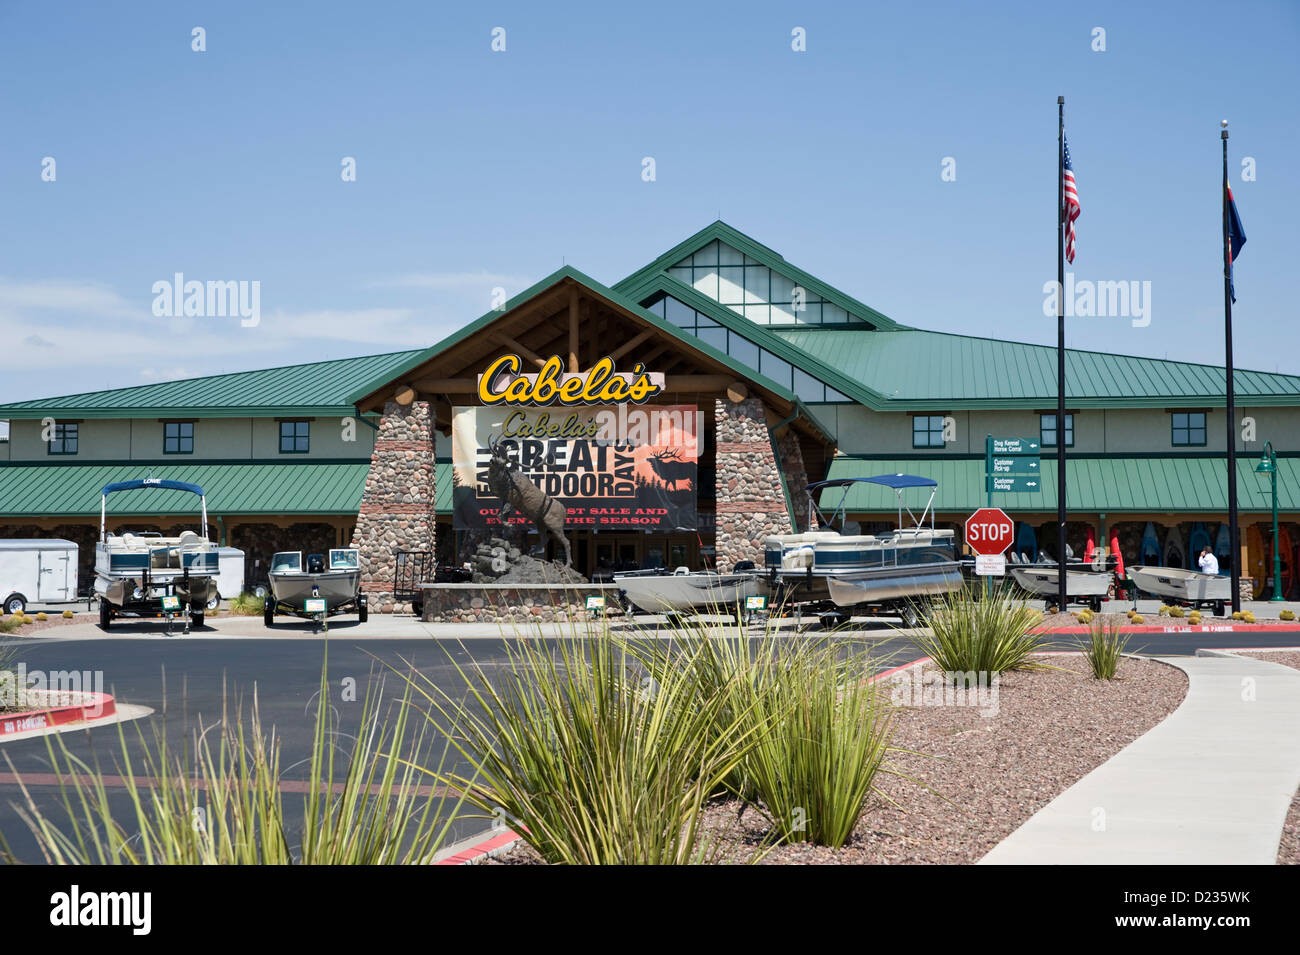 Cabela's Sporting Goods store at Westgate, Glendale, Arizona, USA Banque D'Images